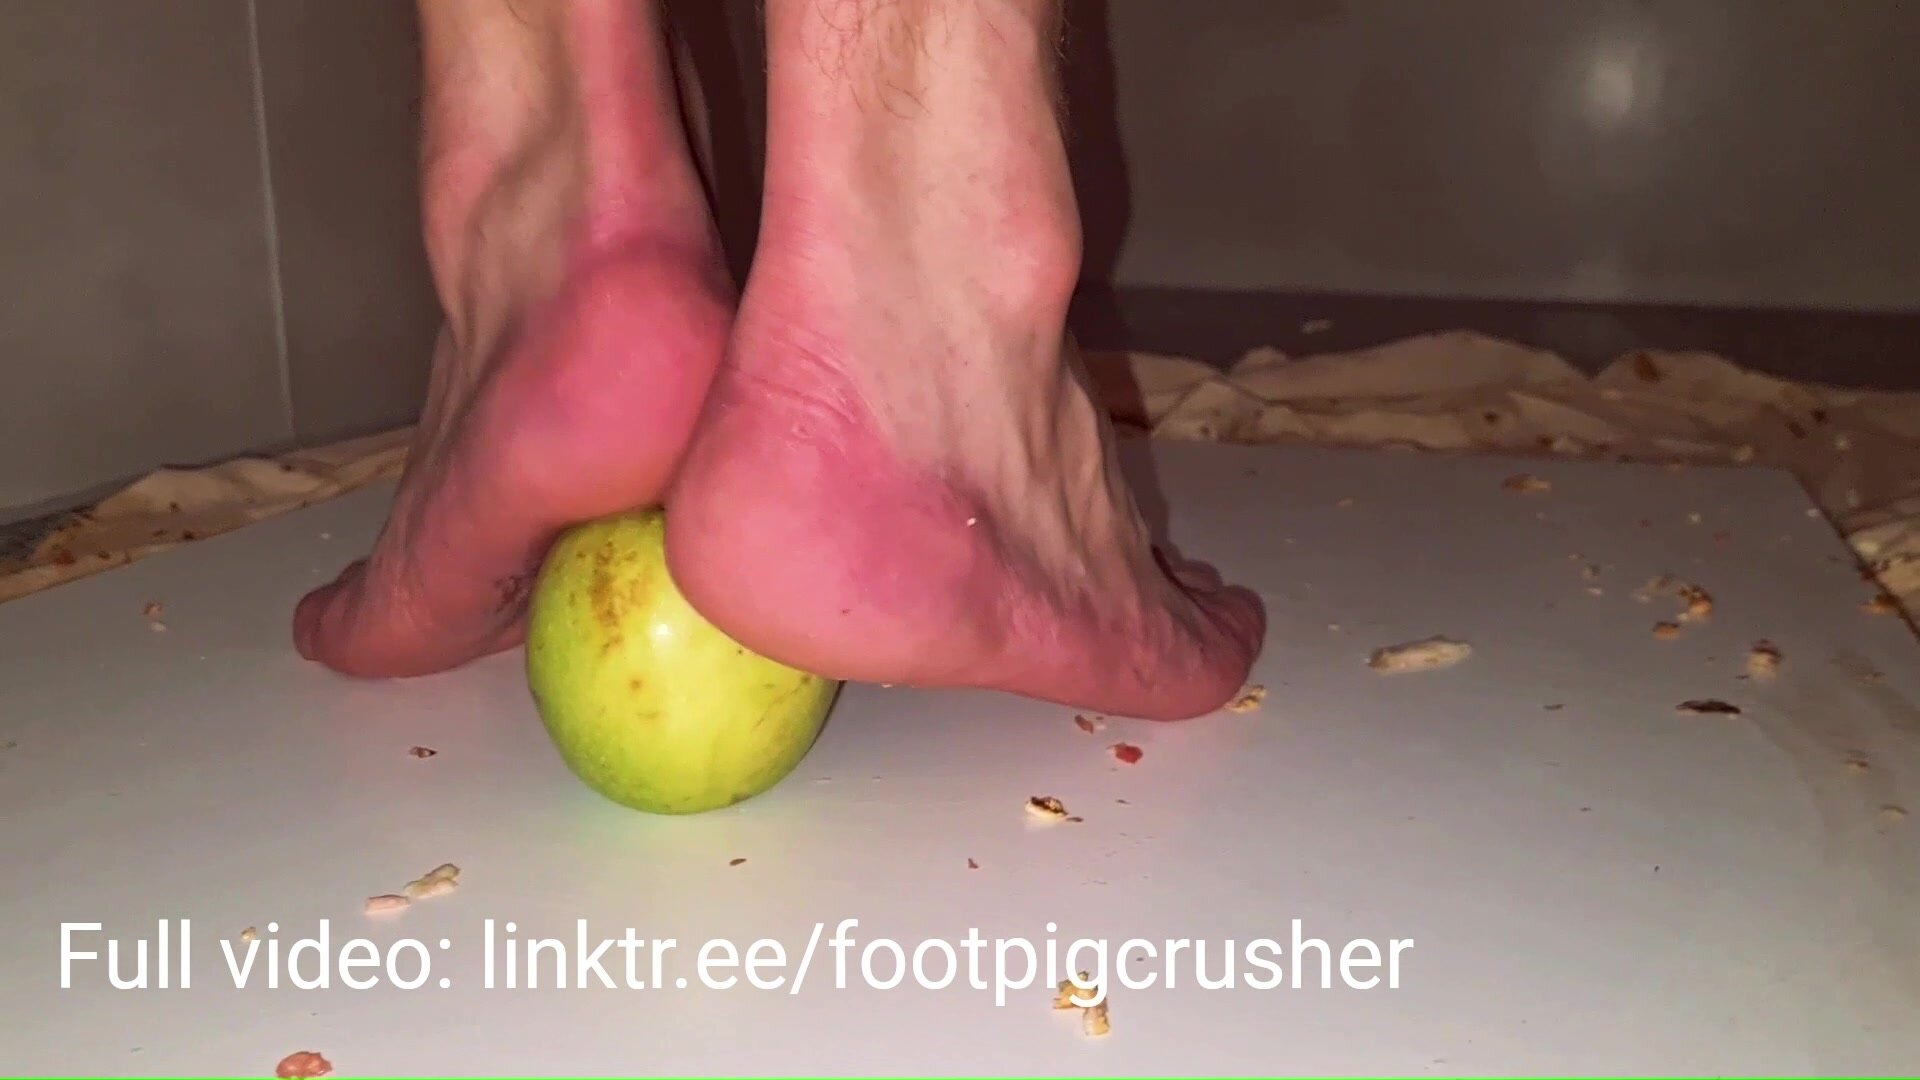 Crushing an apple under my soles